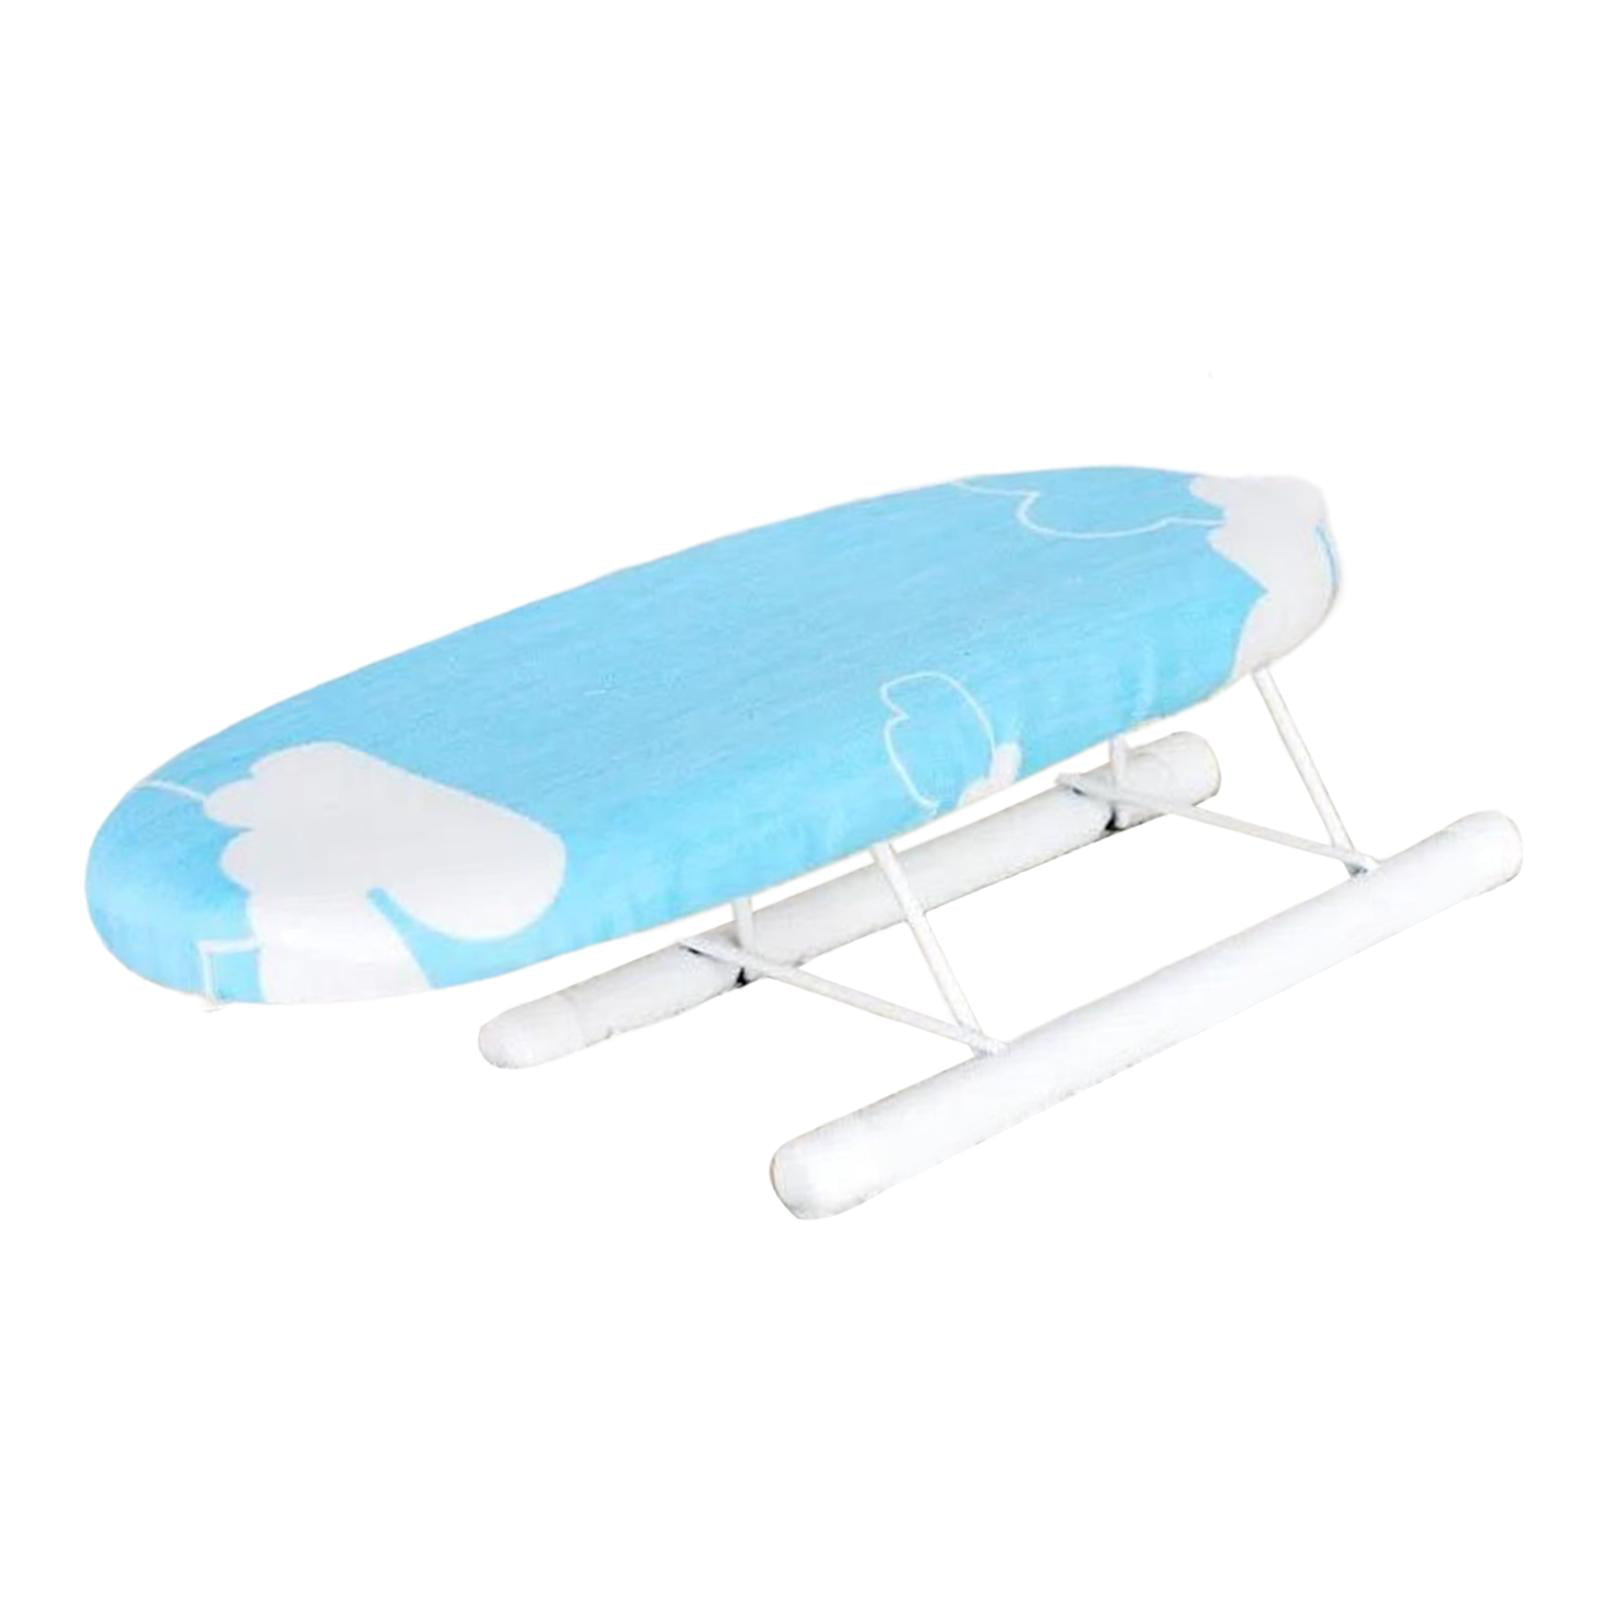 Mini Ironing Board Foldable Sleeve Cuffs Collars Removable Washable for  Laundry blue - Walmart.com